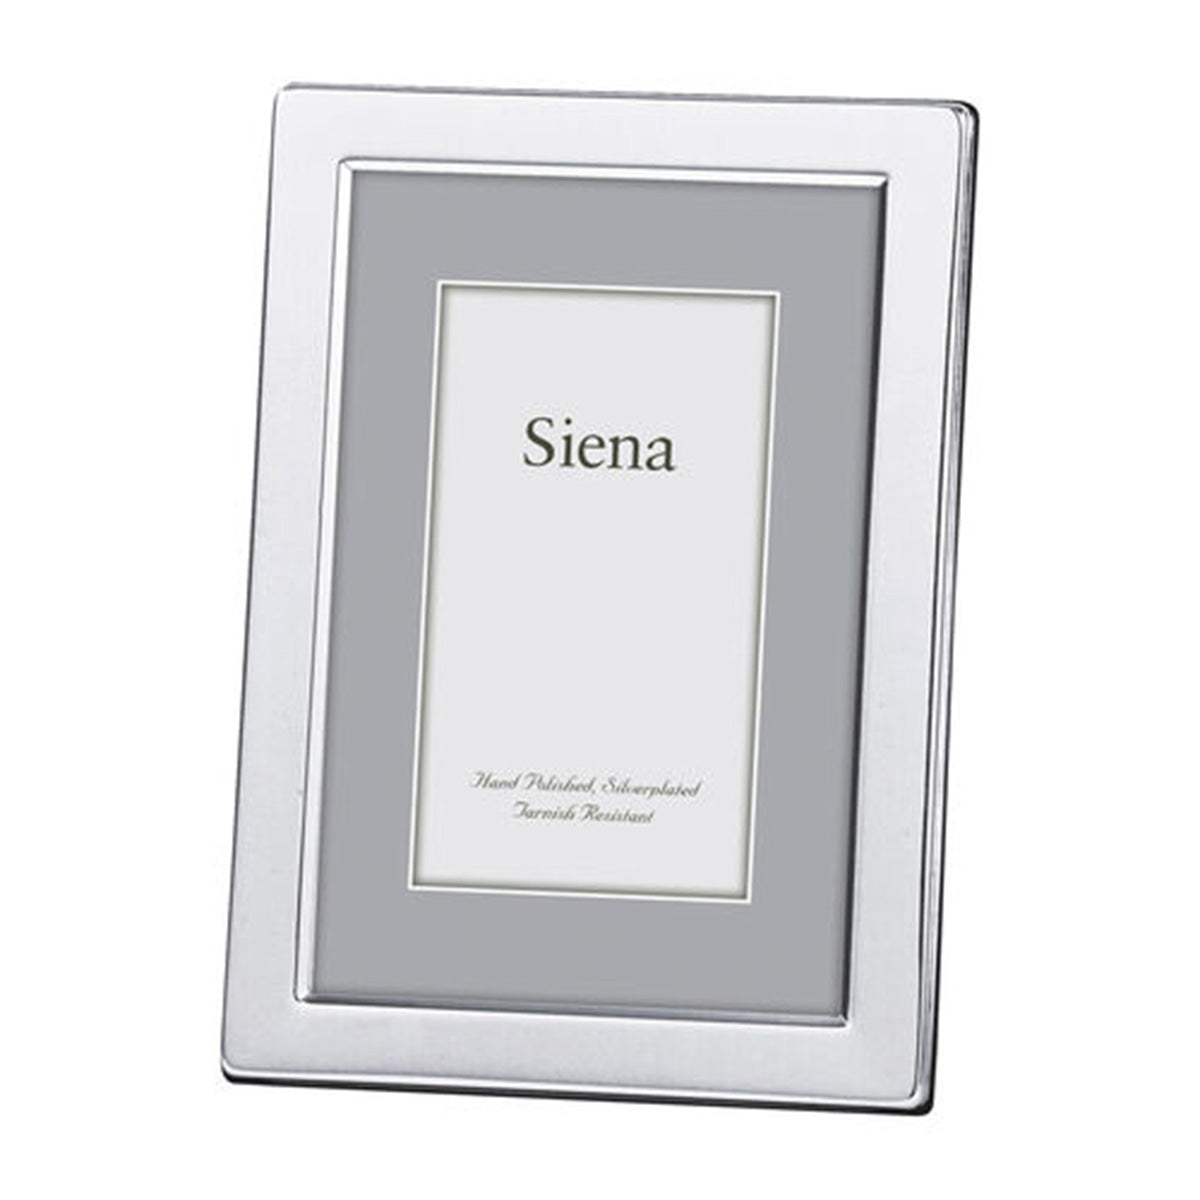 Siena Flat Rounded Edge Silverplate Frame - 4in x 6in